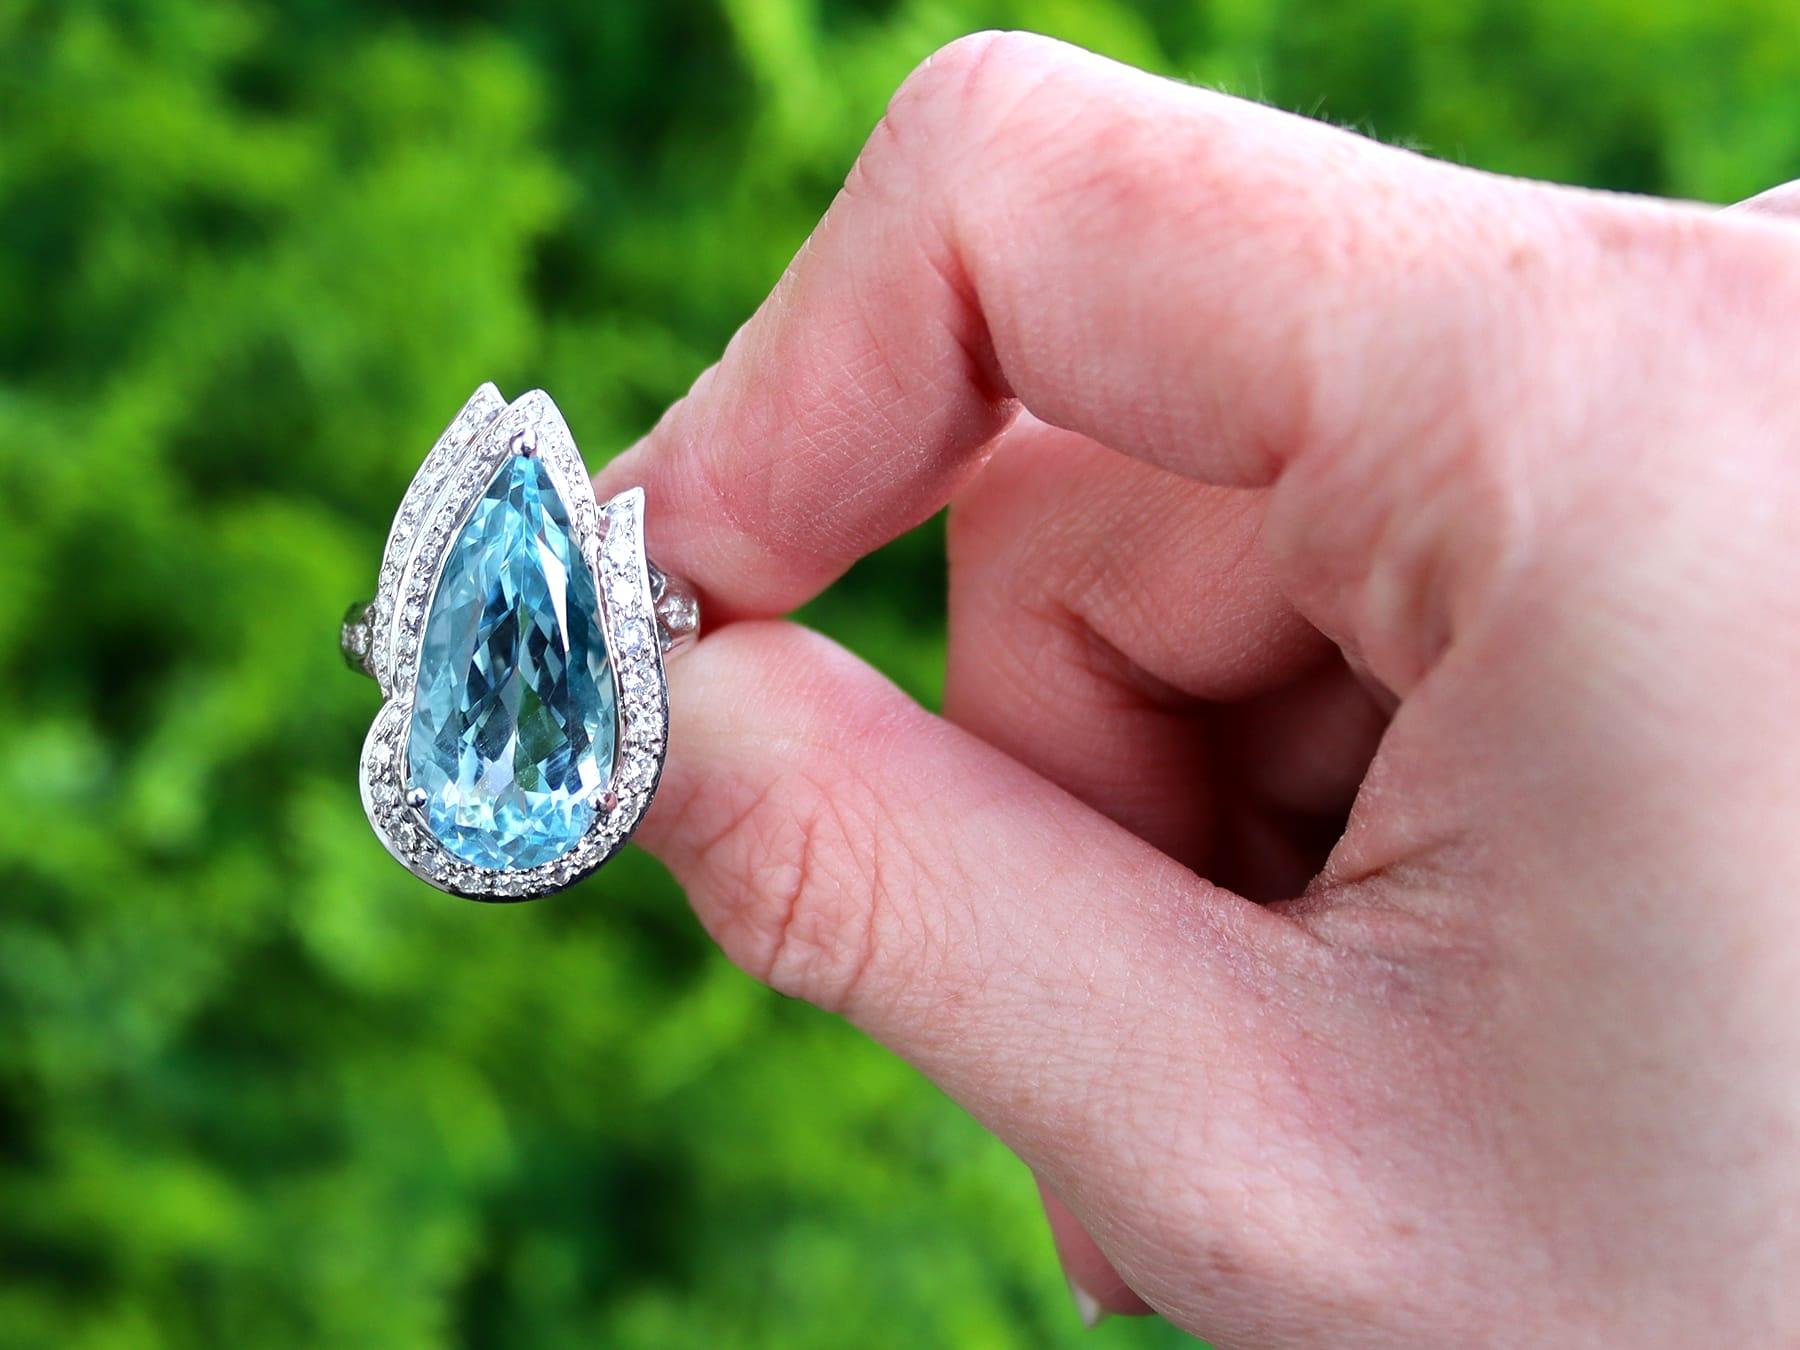 A stunning, fine, and impressive vintage 9.93 carat aquamarine and 0.62 carat diamond, platinum dress ring; part of our diverse vintage jewelry and estate jewelry collections.

This stunning, fine and impressive vintage aquamarine ring has been